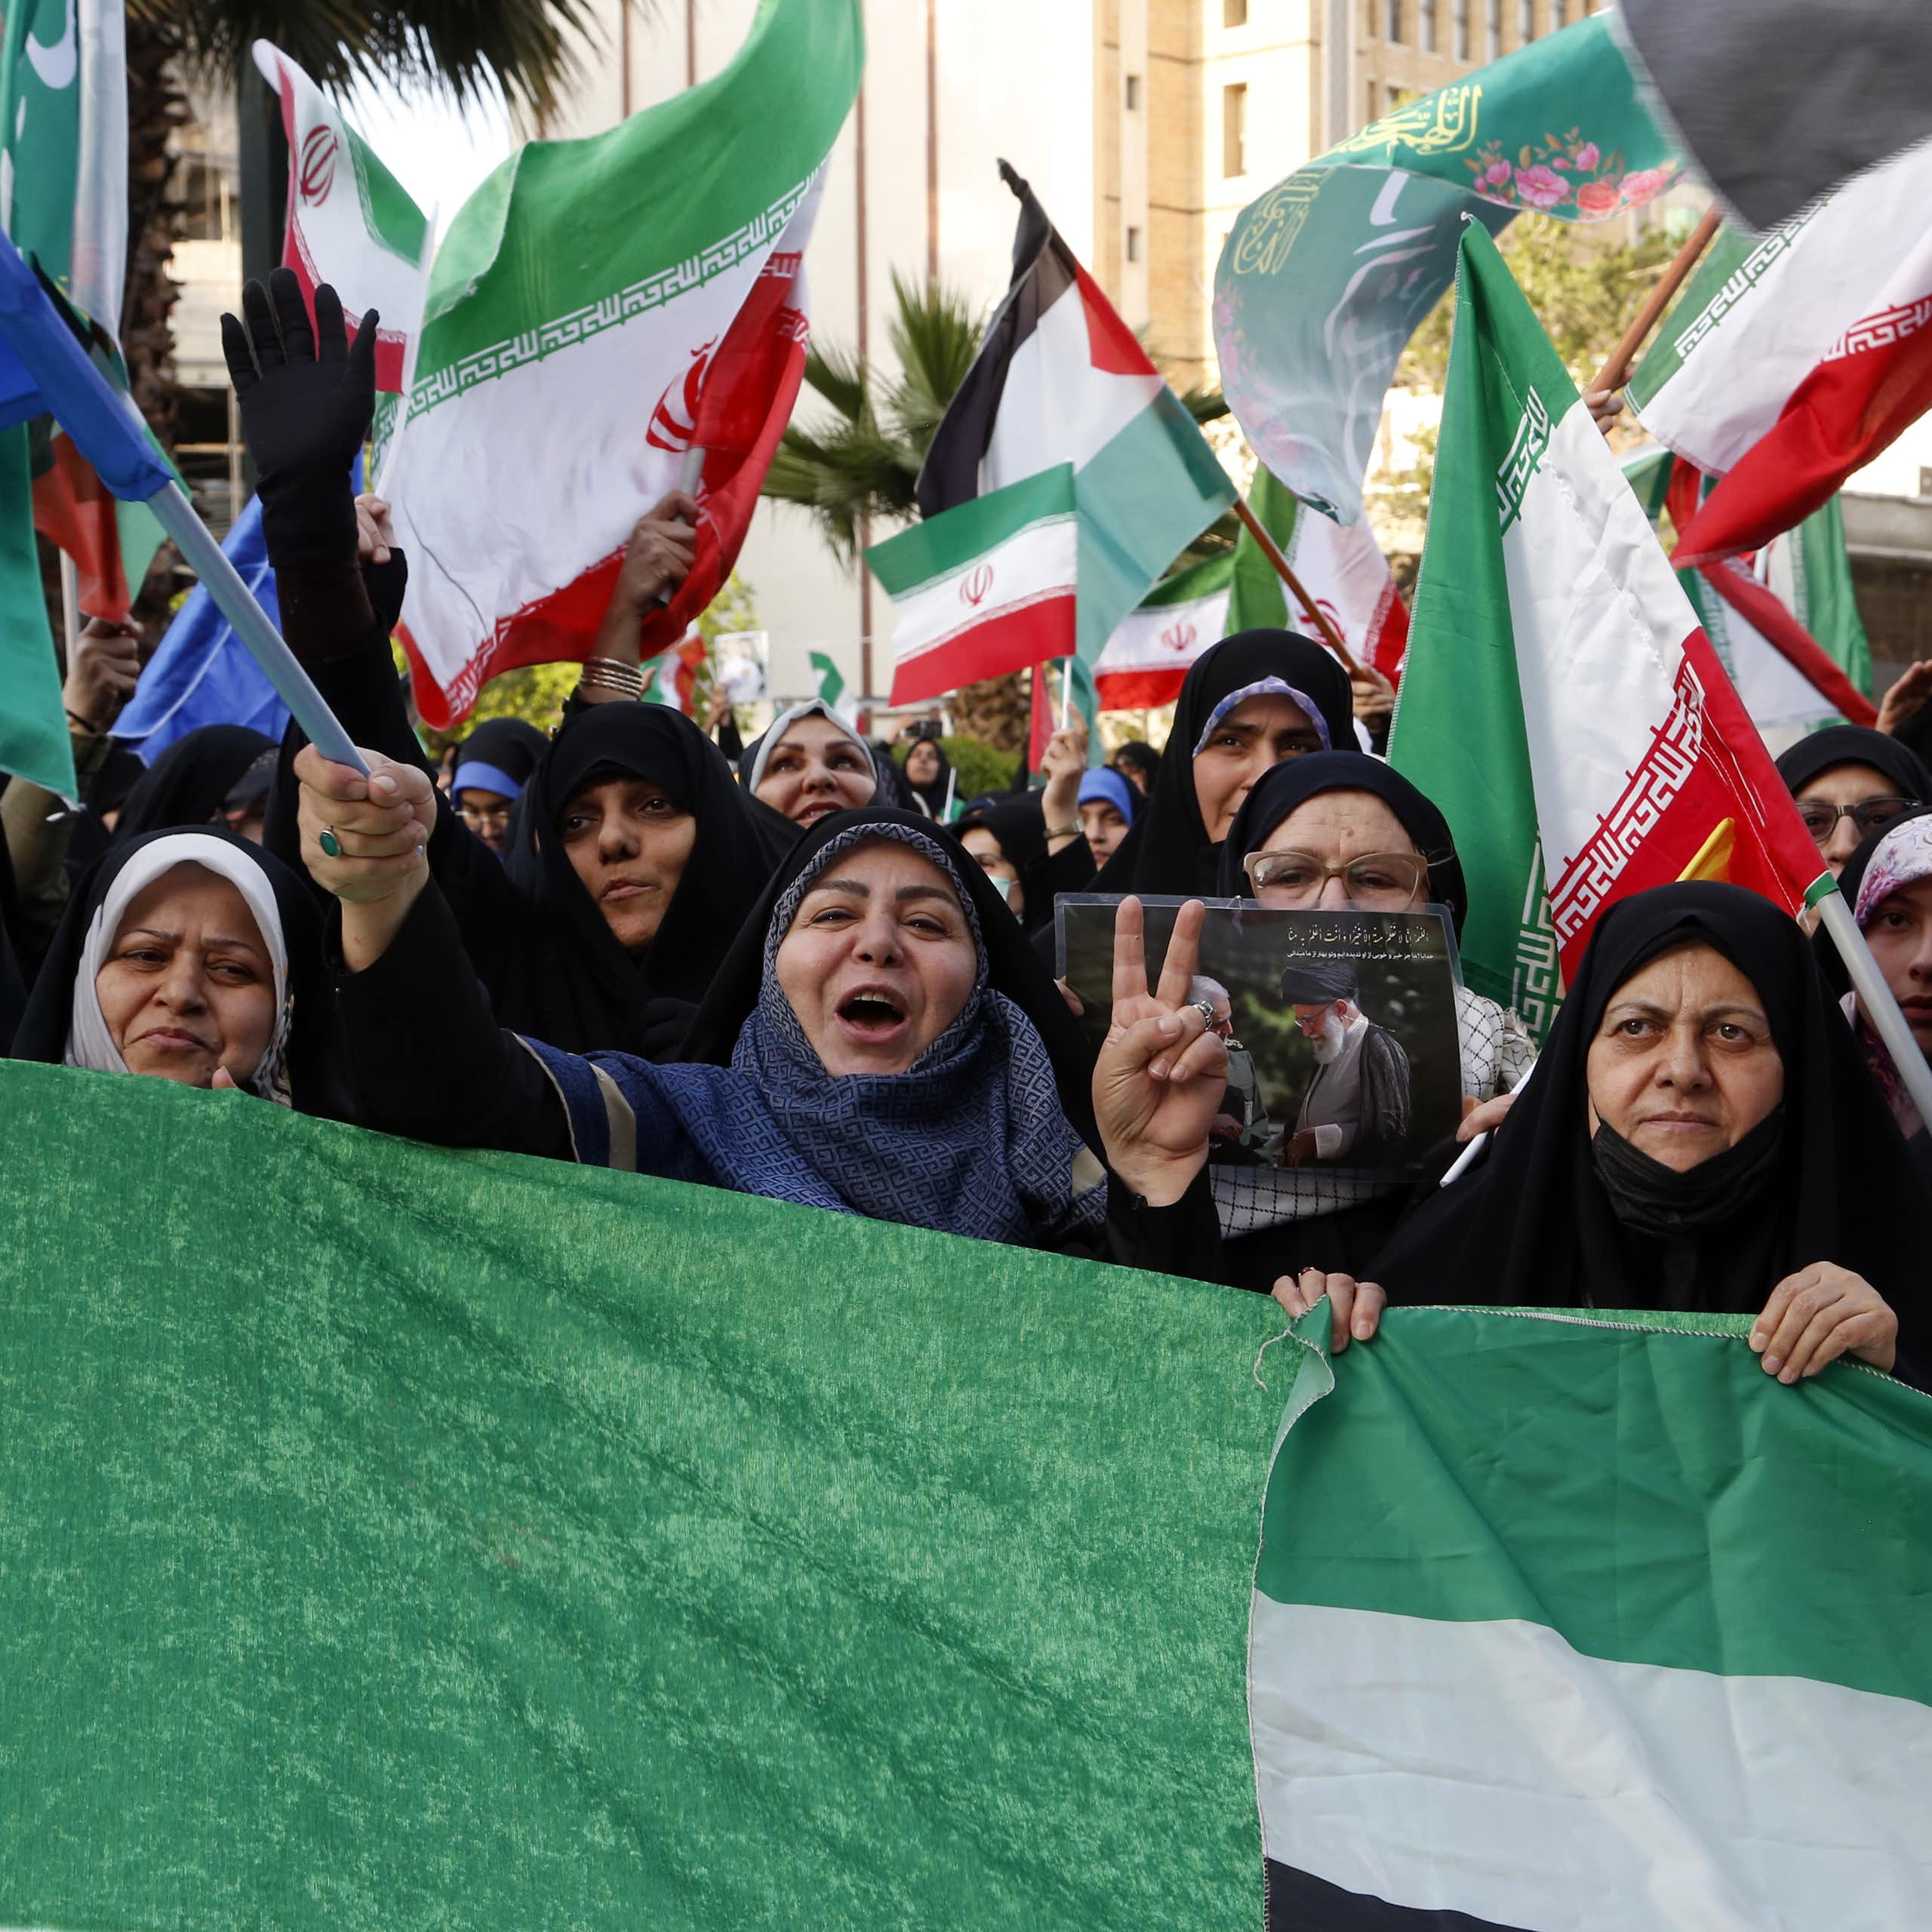 Iran is gaining credibility in the Muslim world and feeling emboldened. This doesn’t bode well for the region